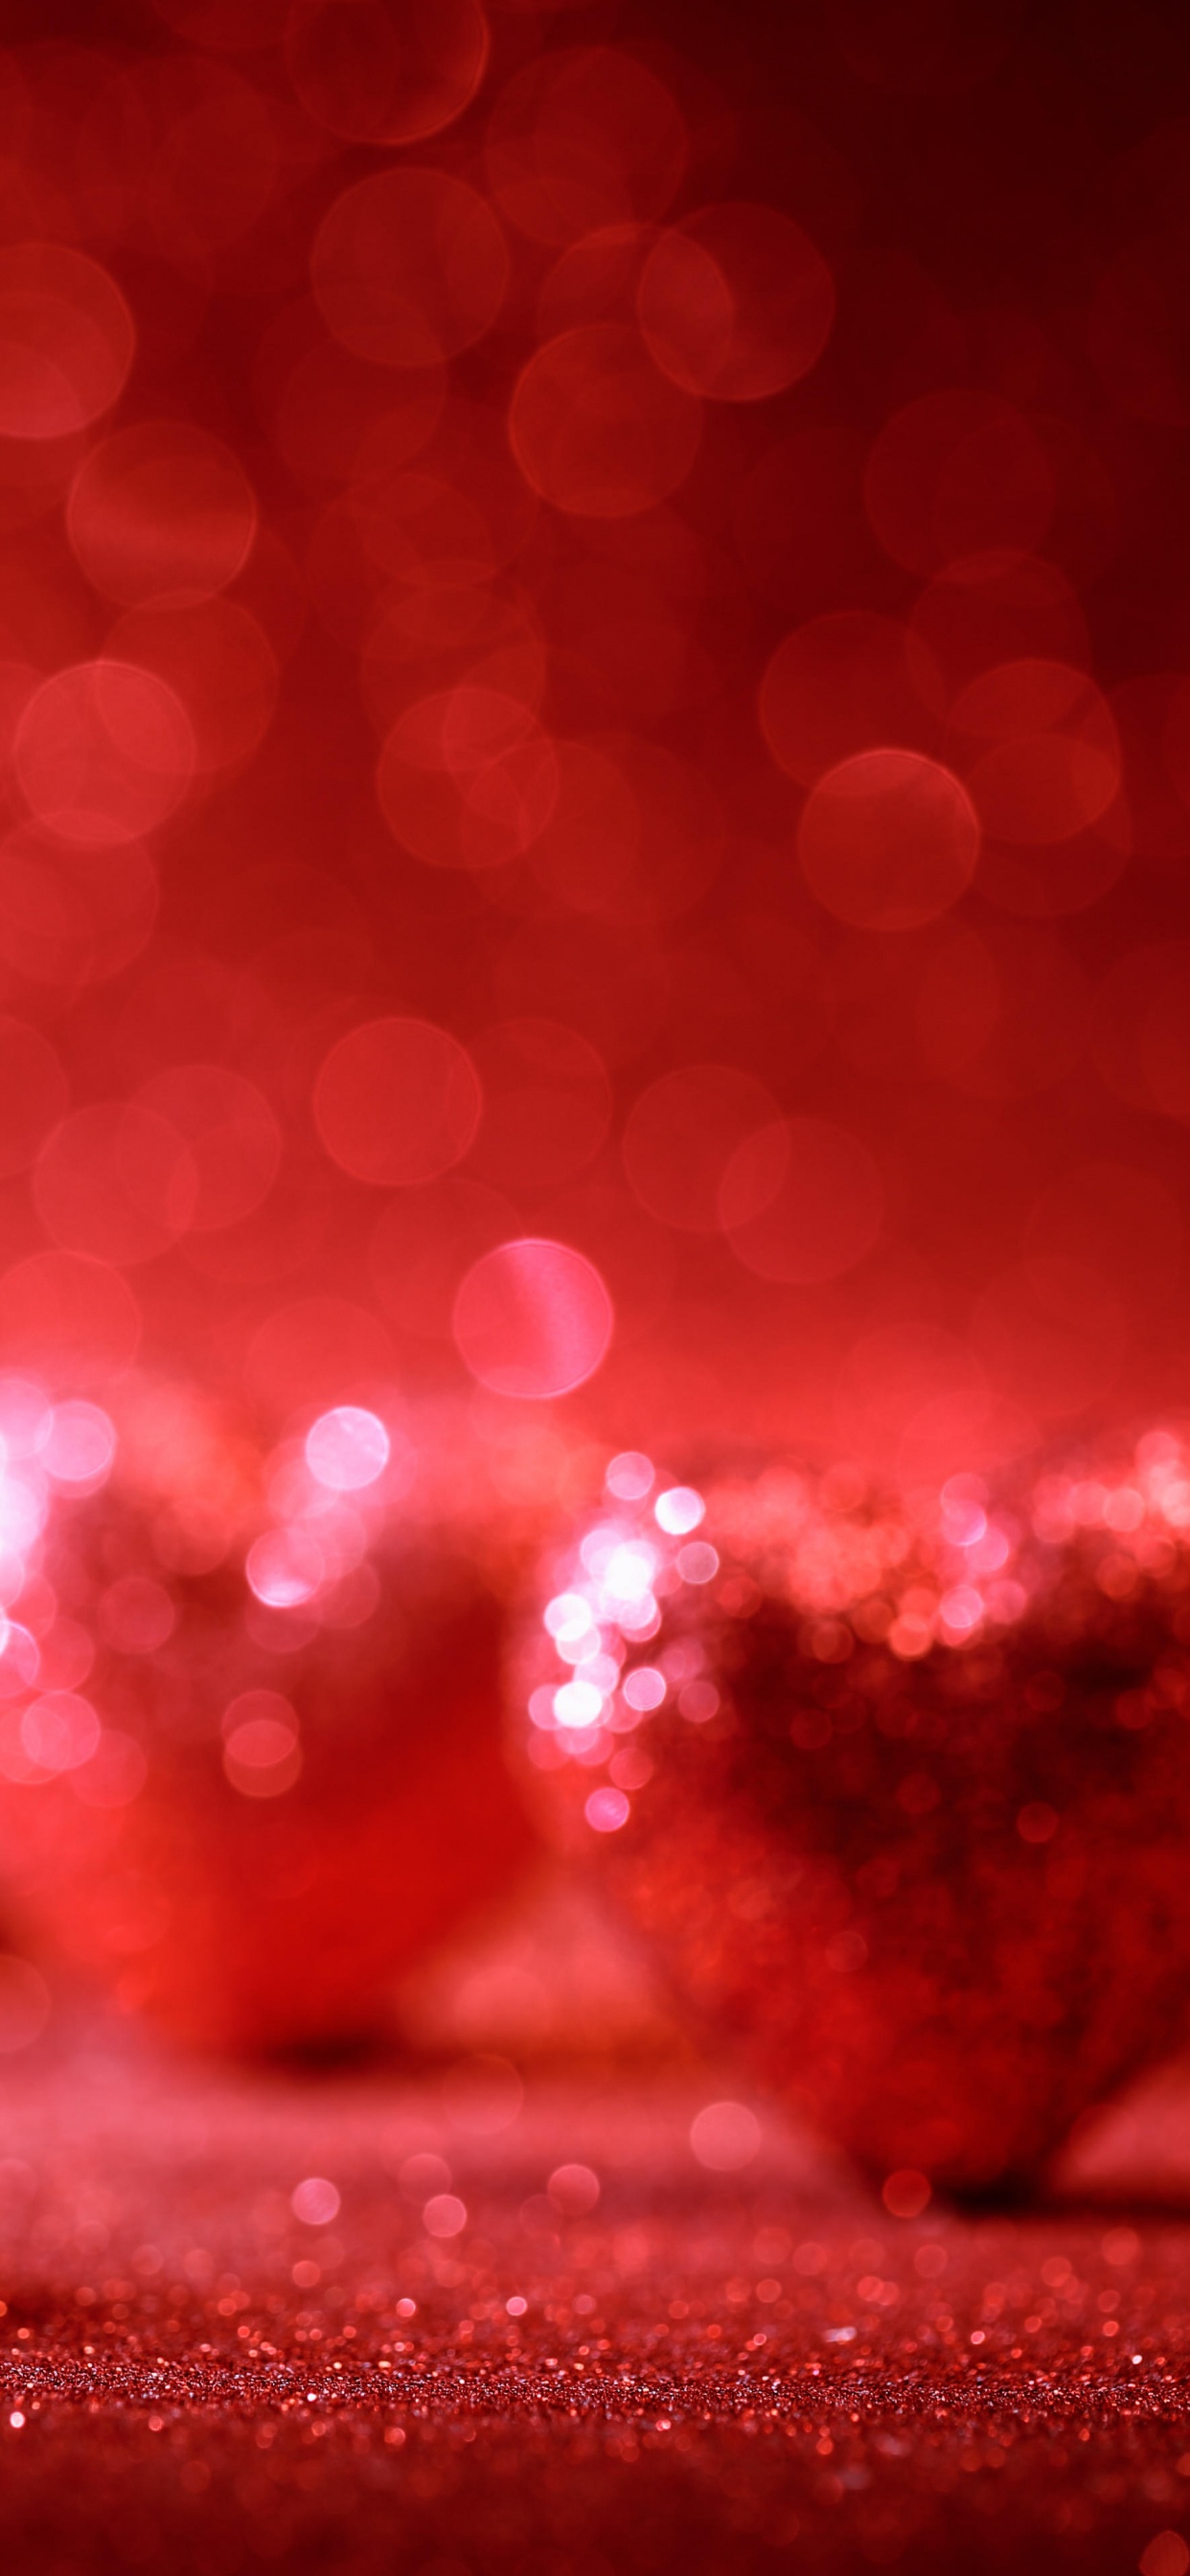 Valentines Day, Heart, Red, Love, Romance. Wallpaper in 1242x2688 Resolution